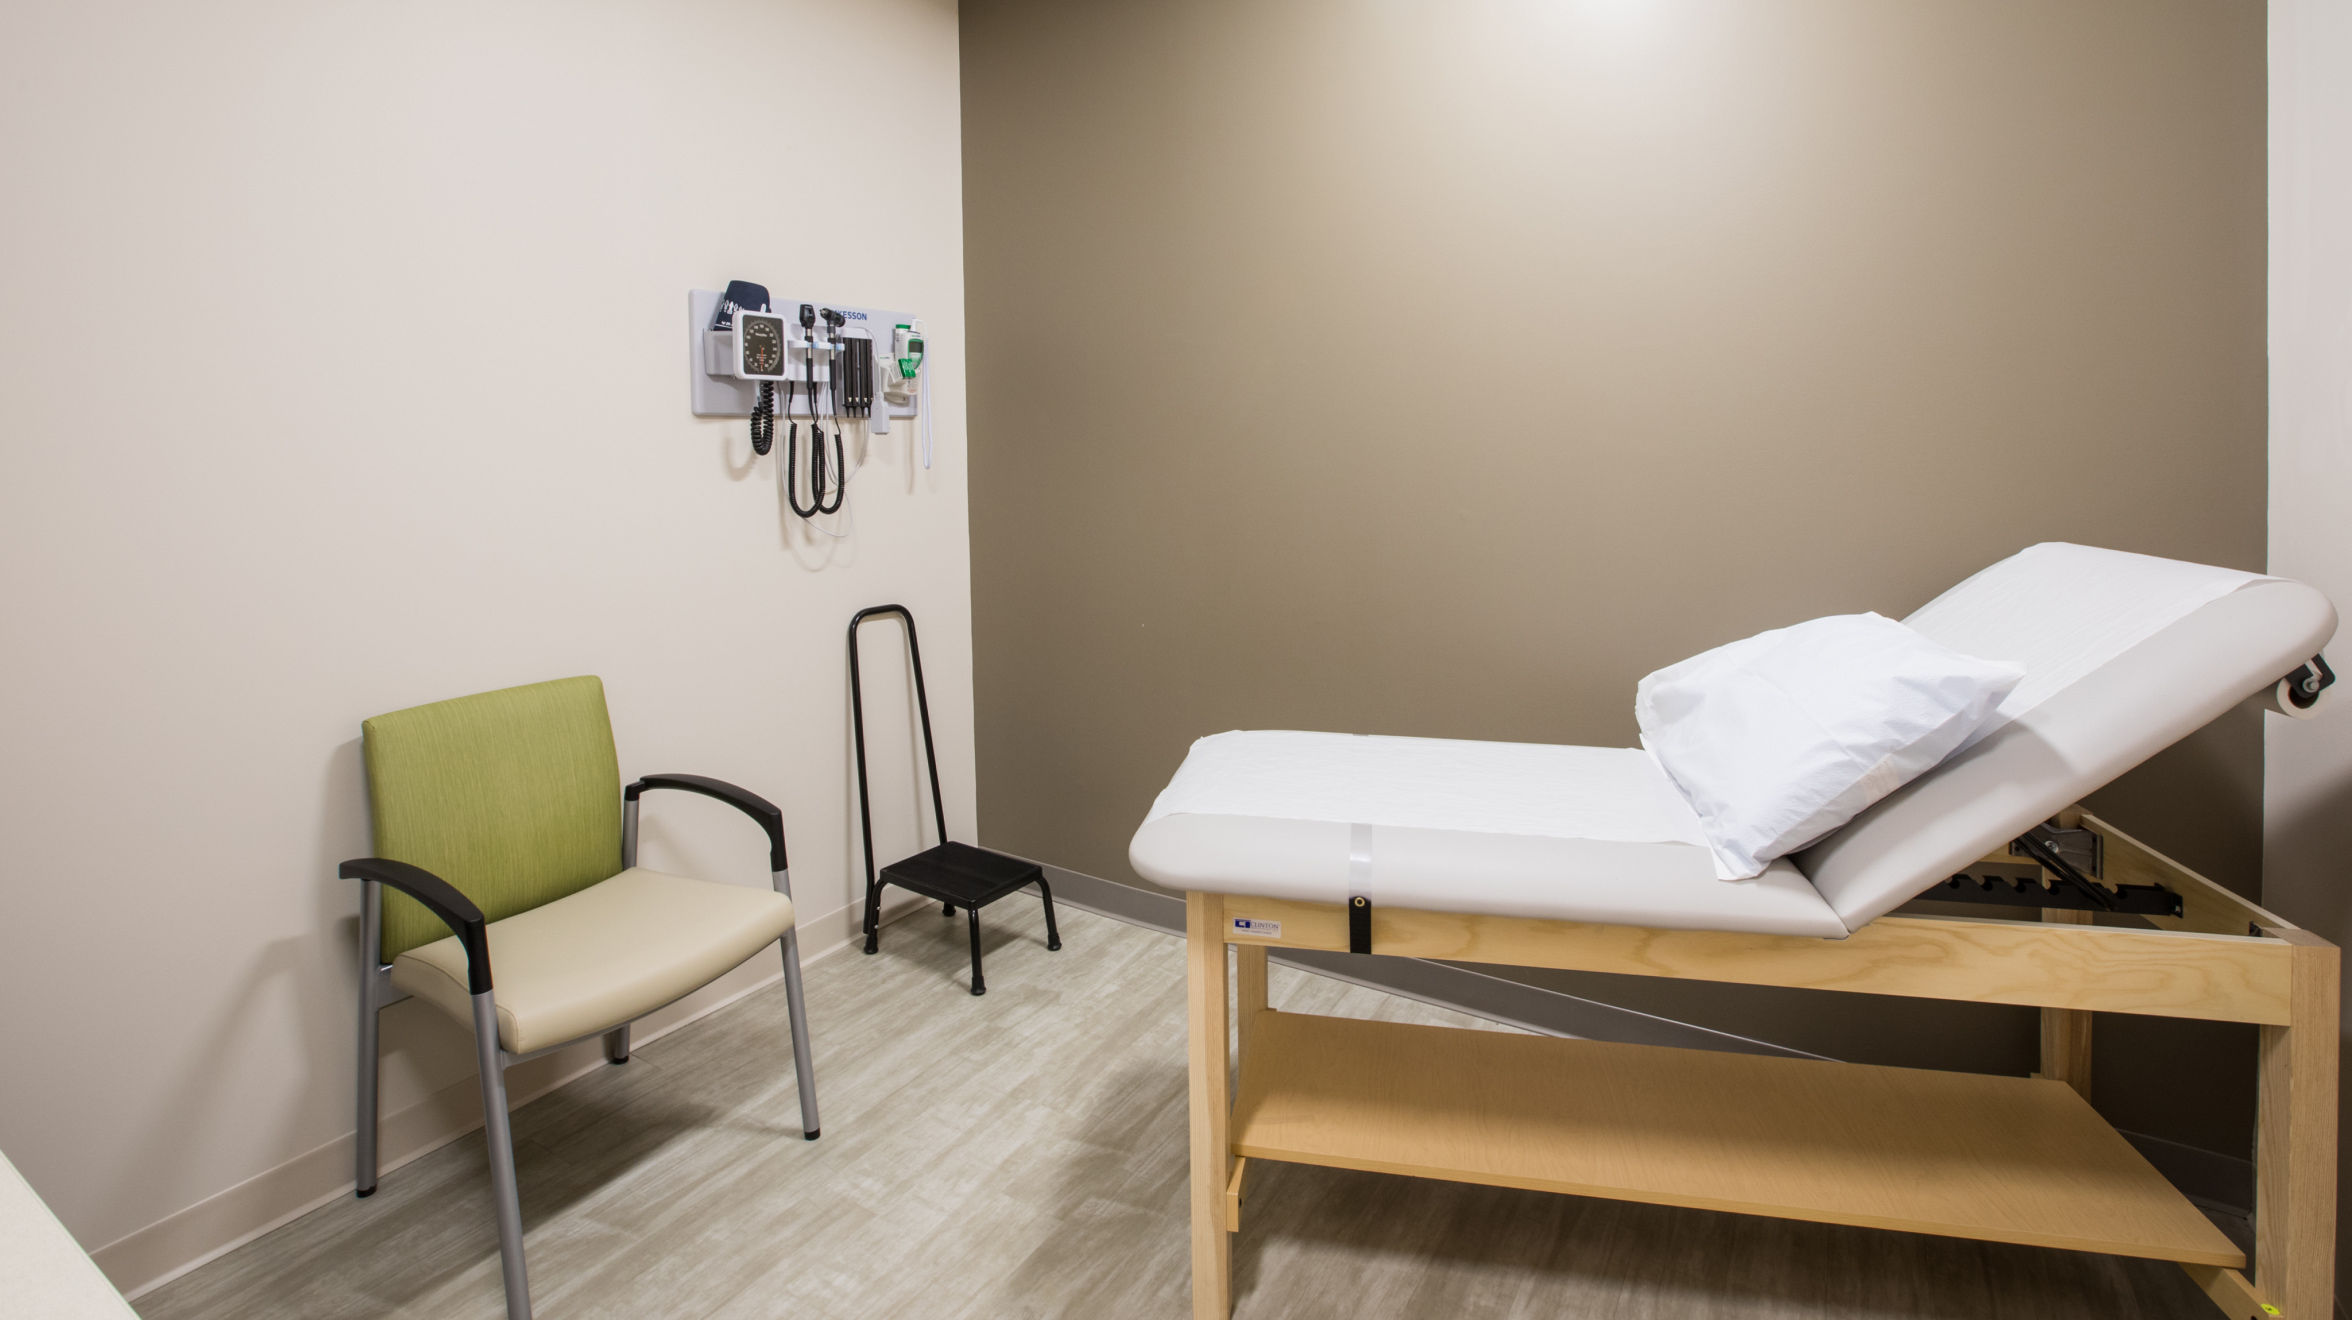 OSH room with a patient bed and medical equipment